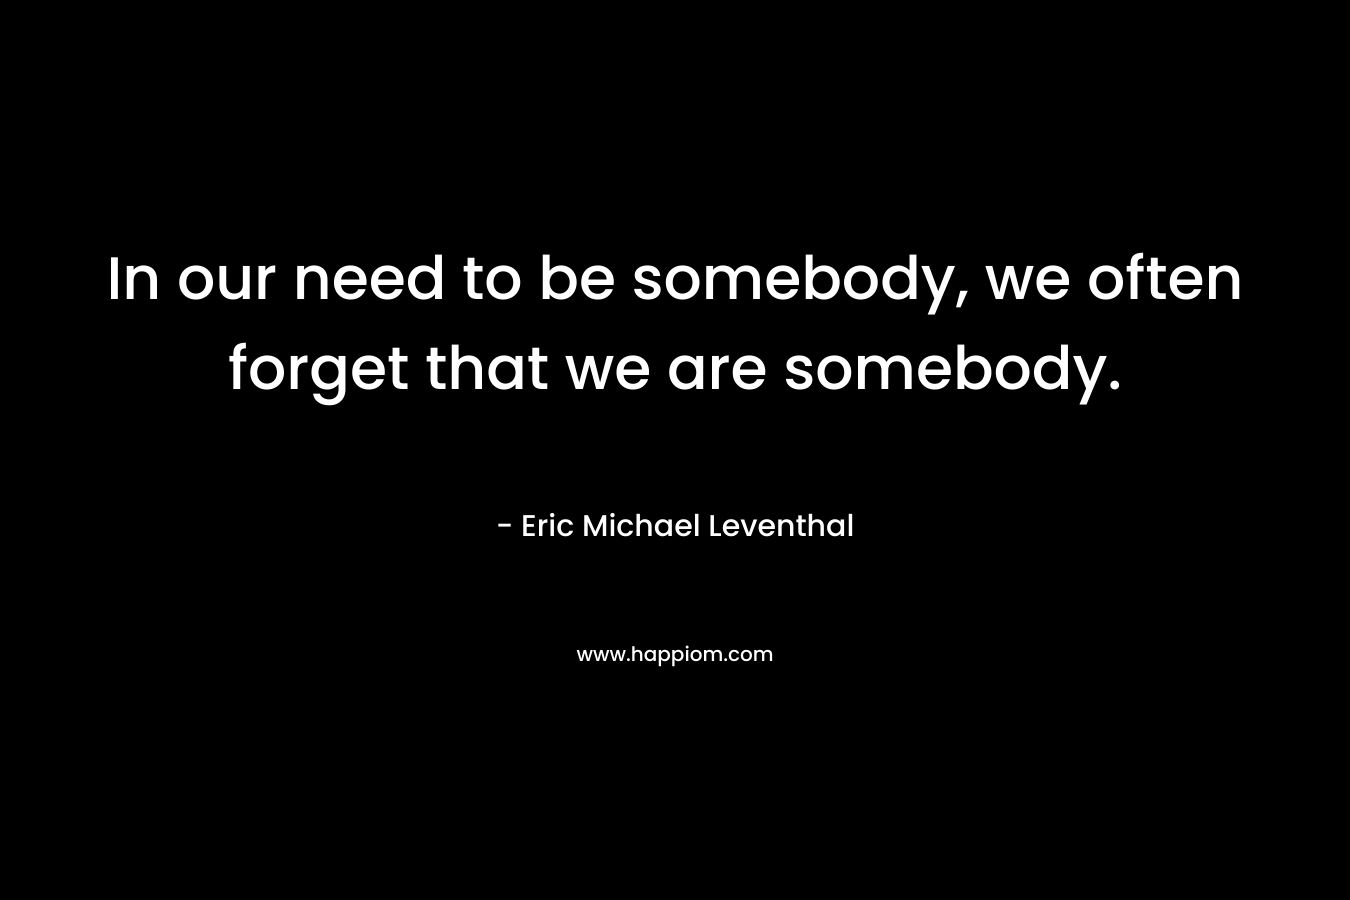 In our need to be somebody, we often forget that we are somebody.